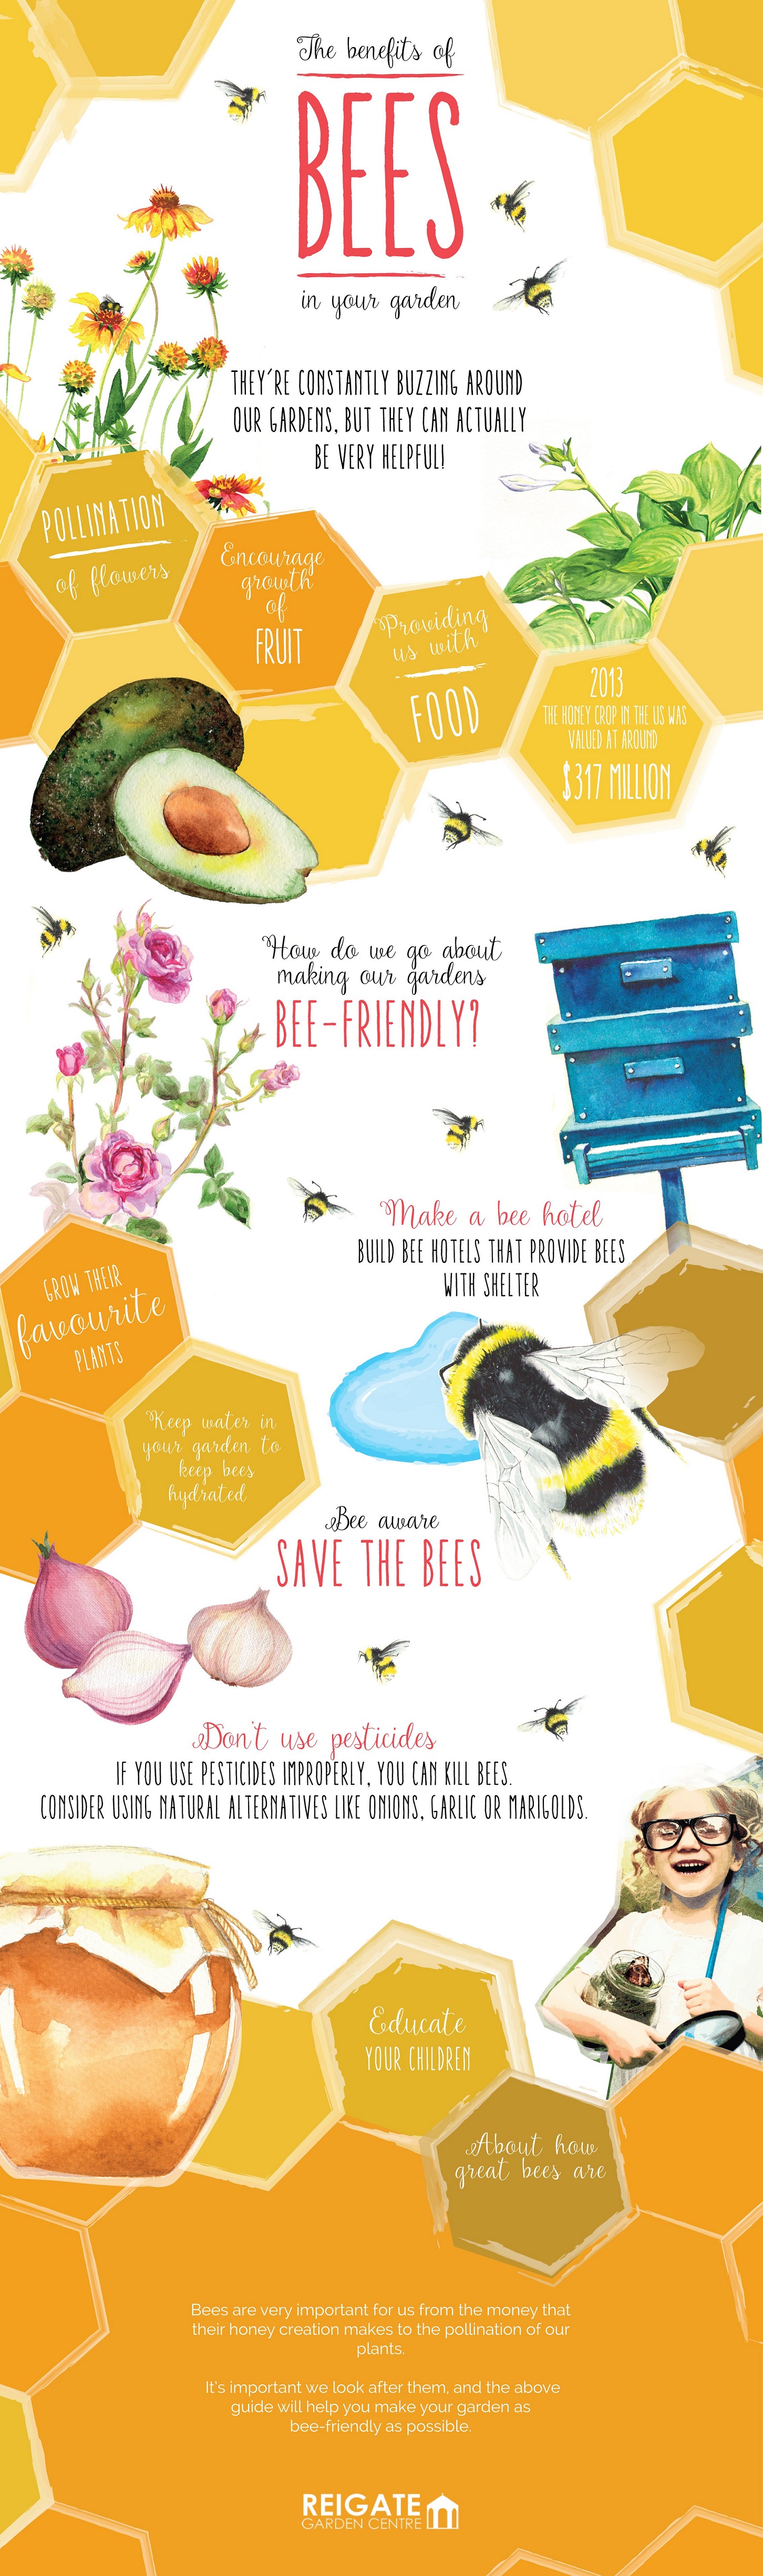 benefit of bees in your garden infographic